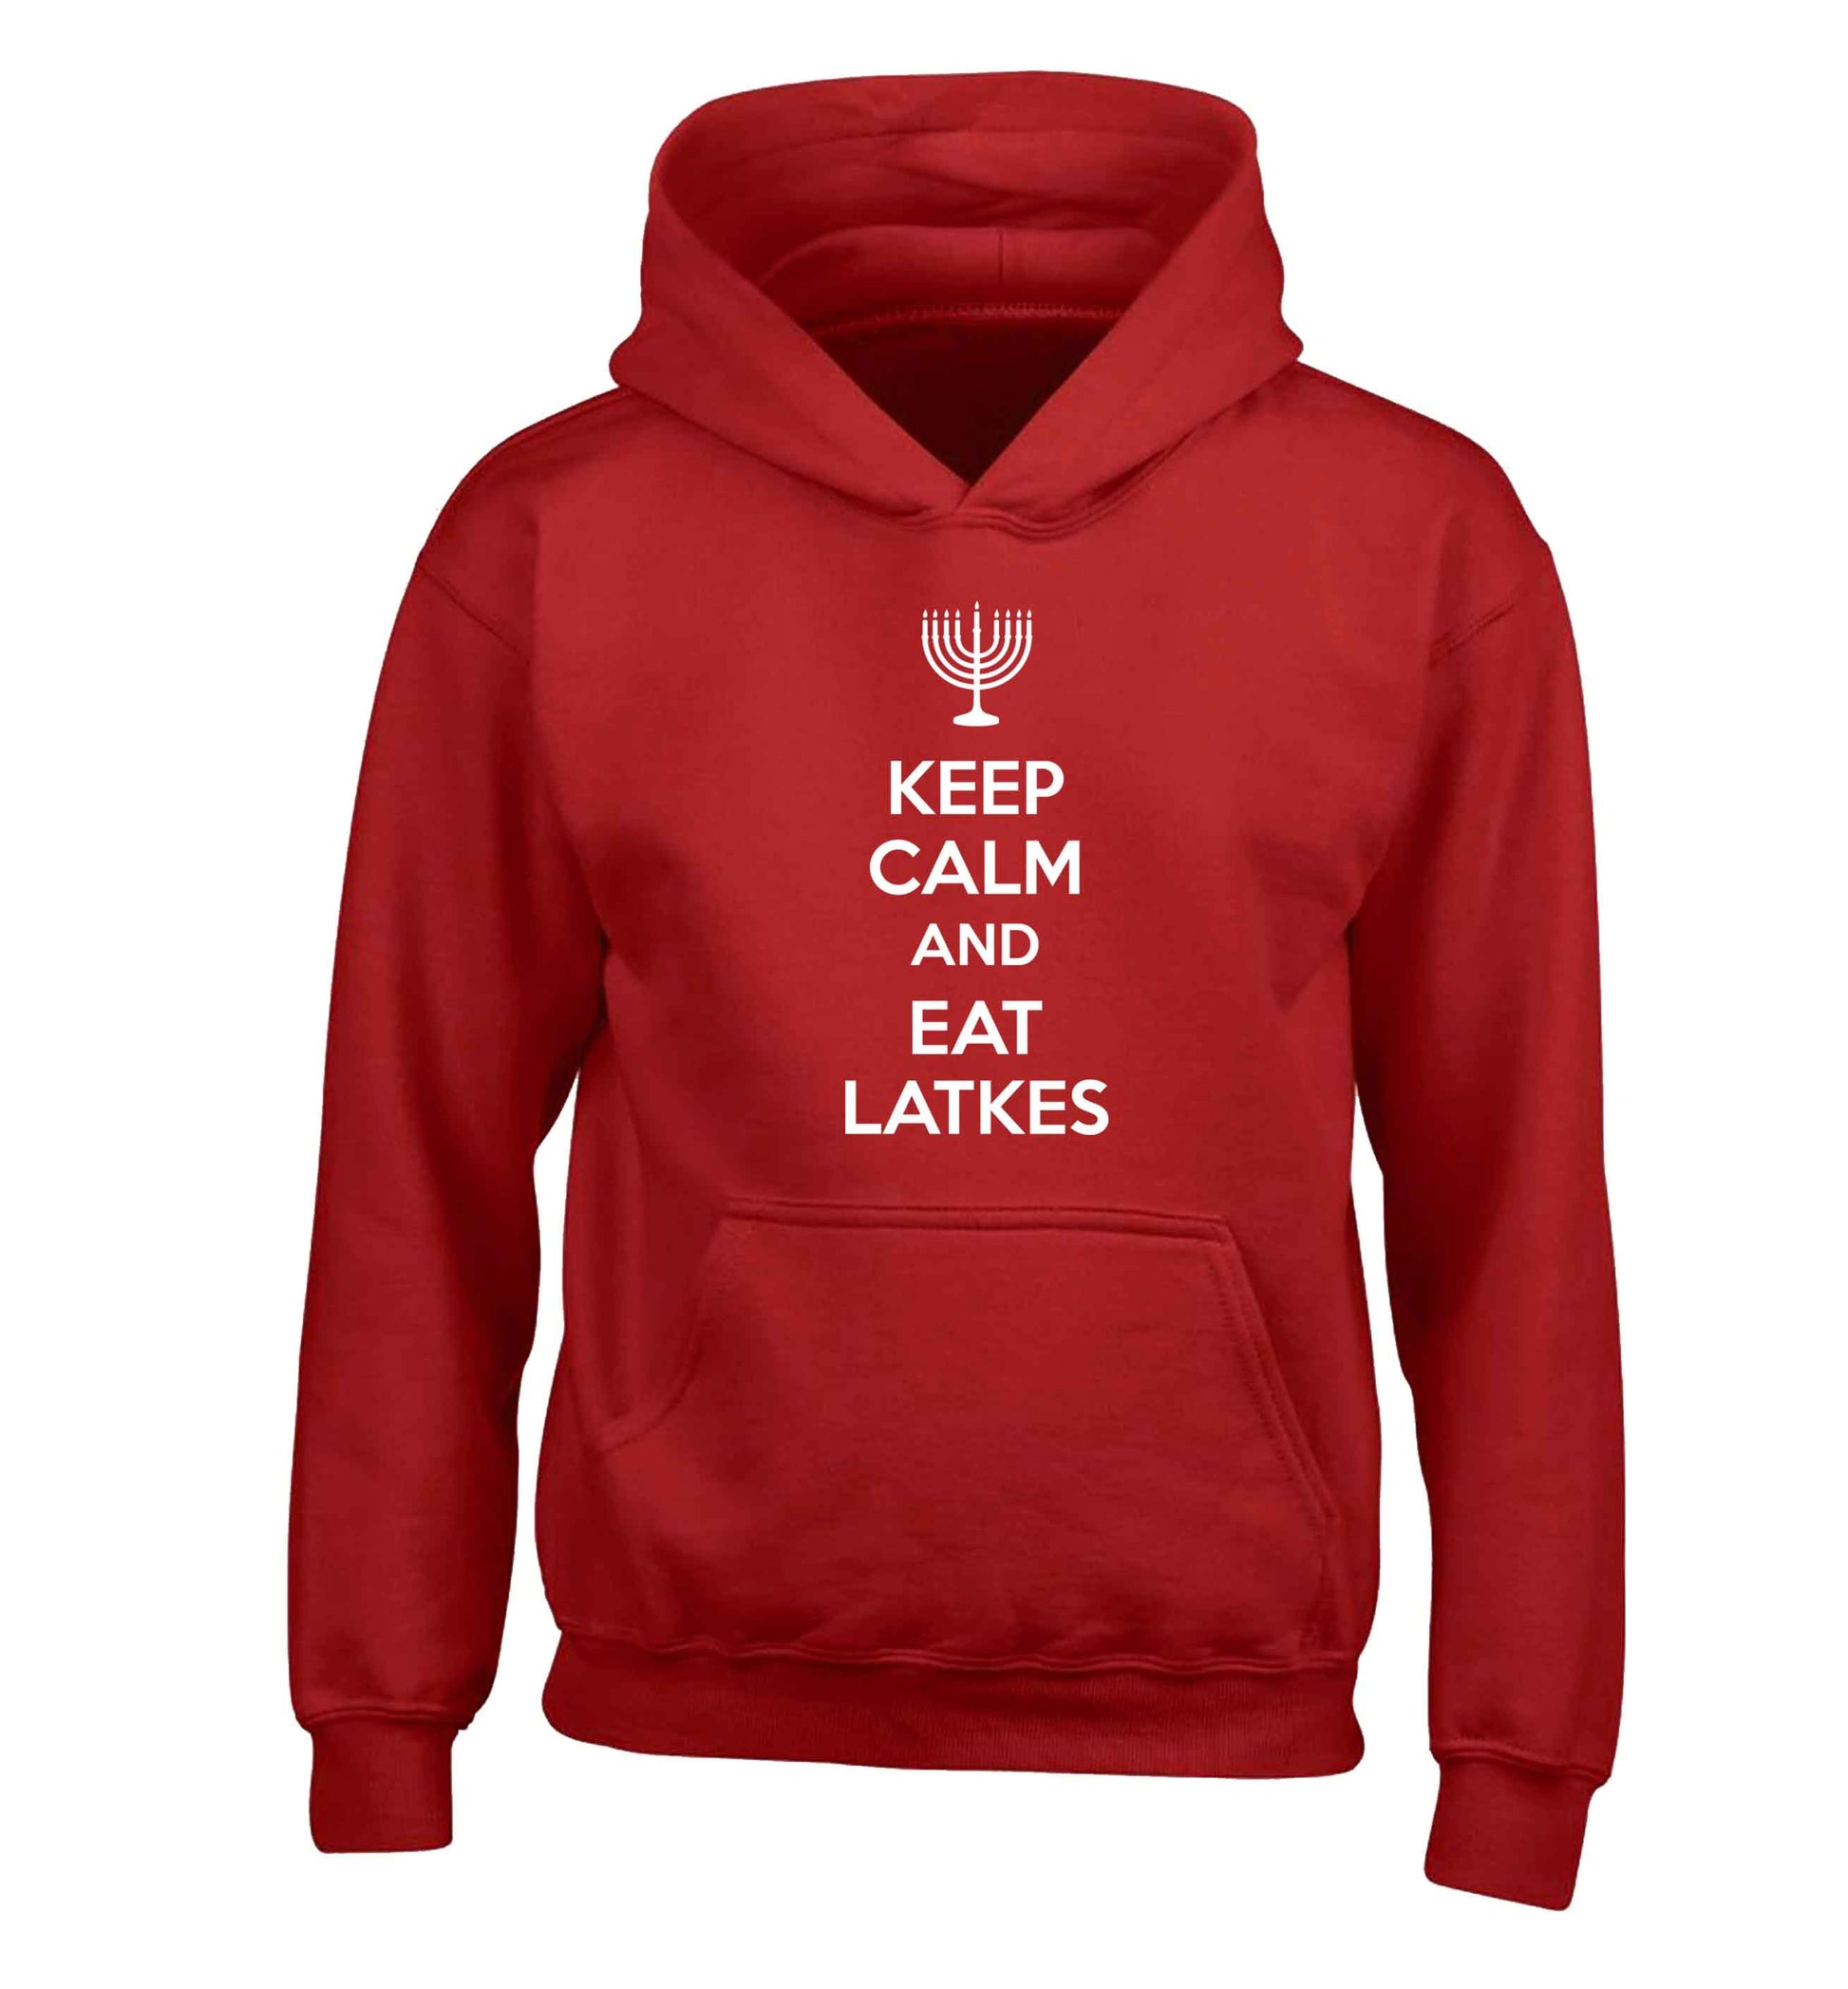 Keep calm and eat latkes children's red hoodie 12-13 Years